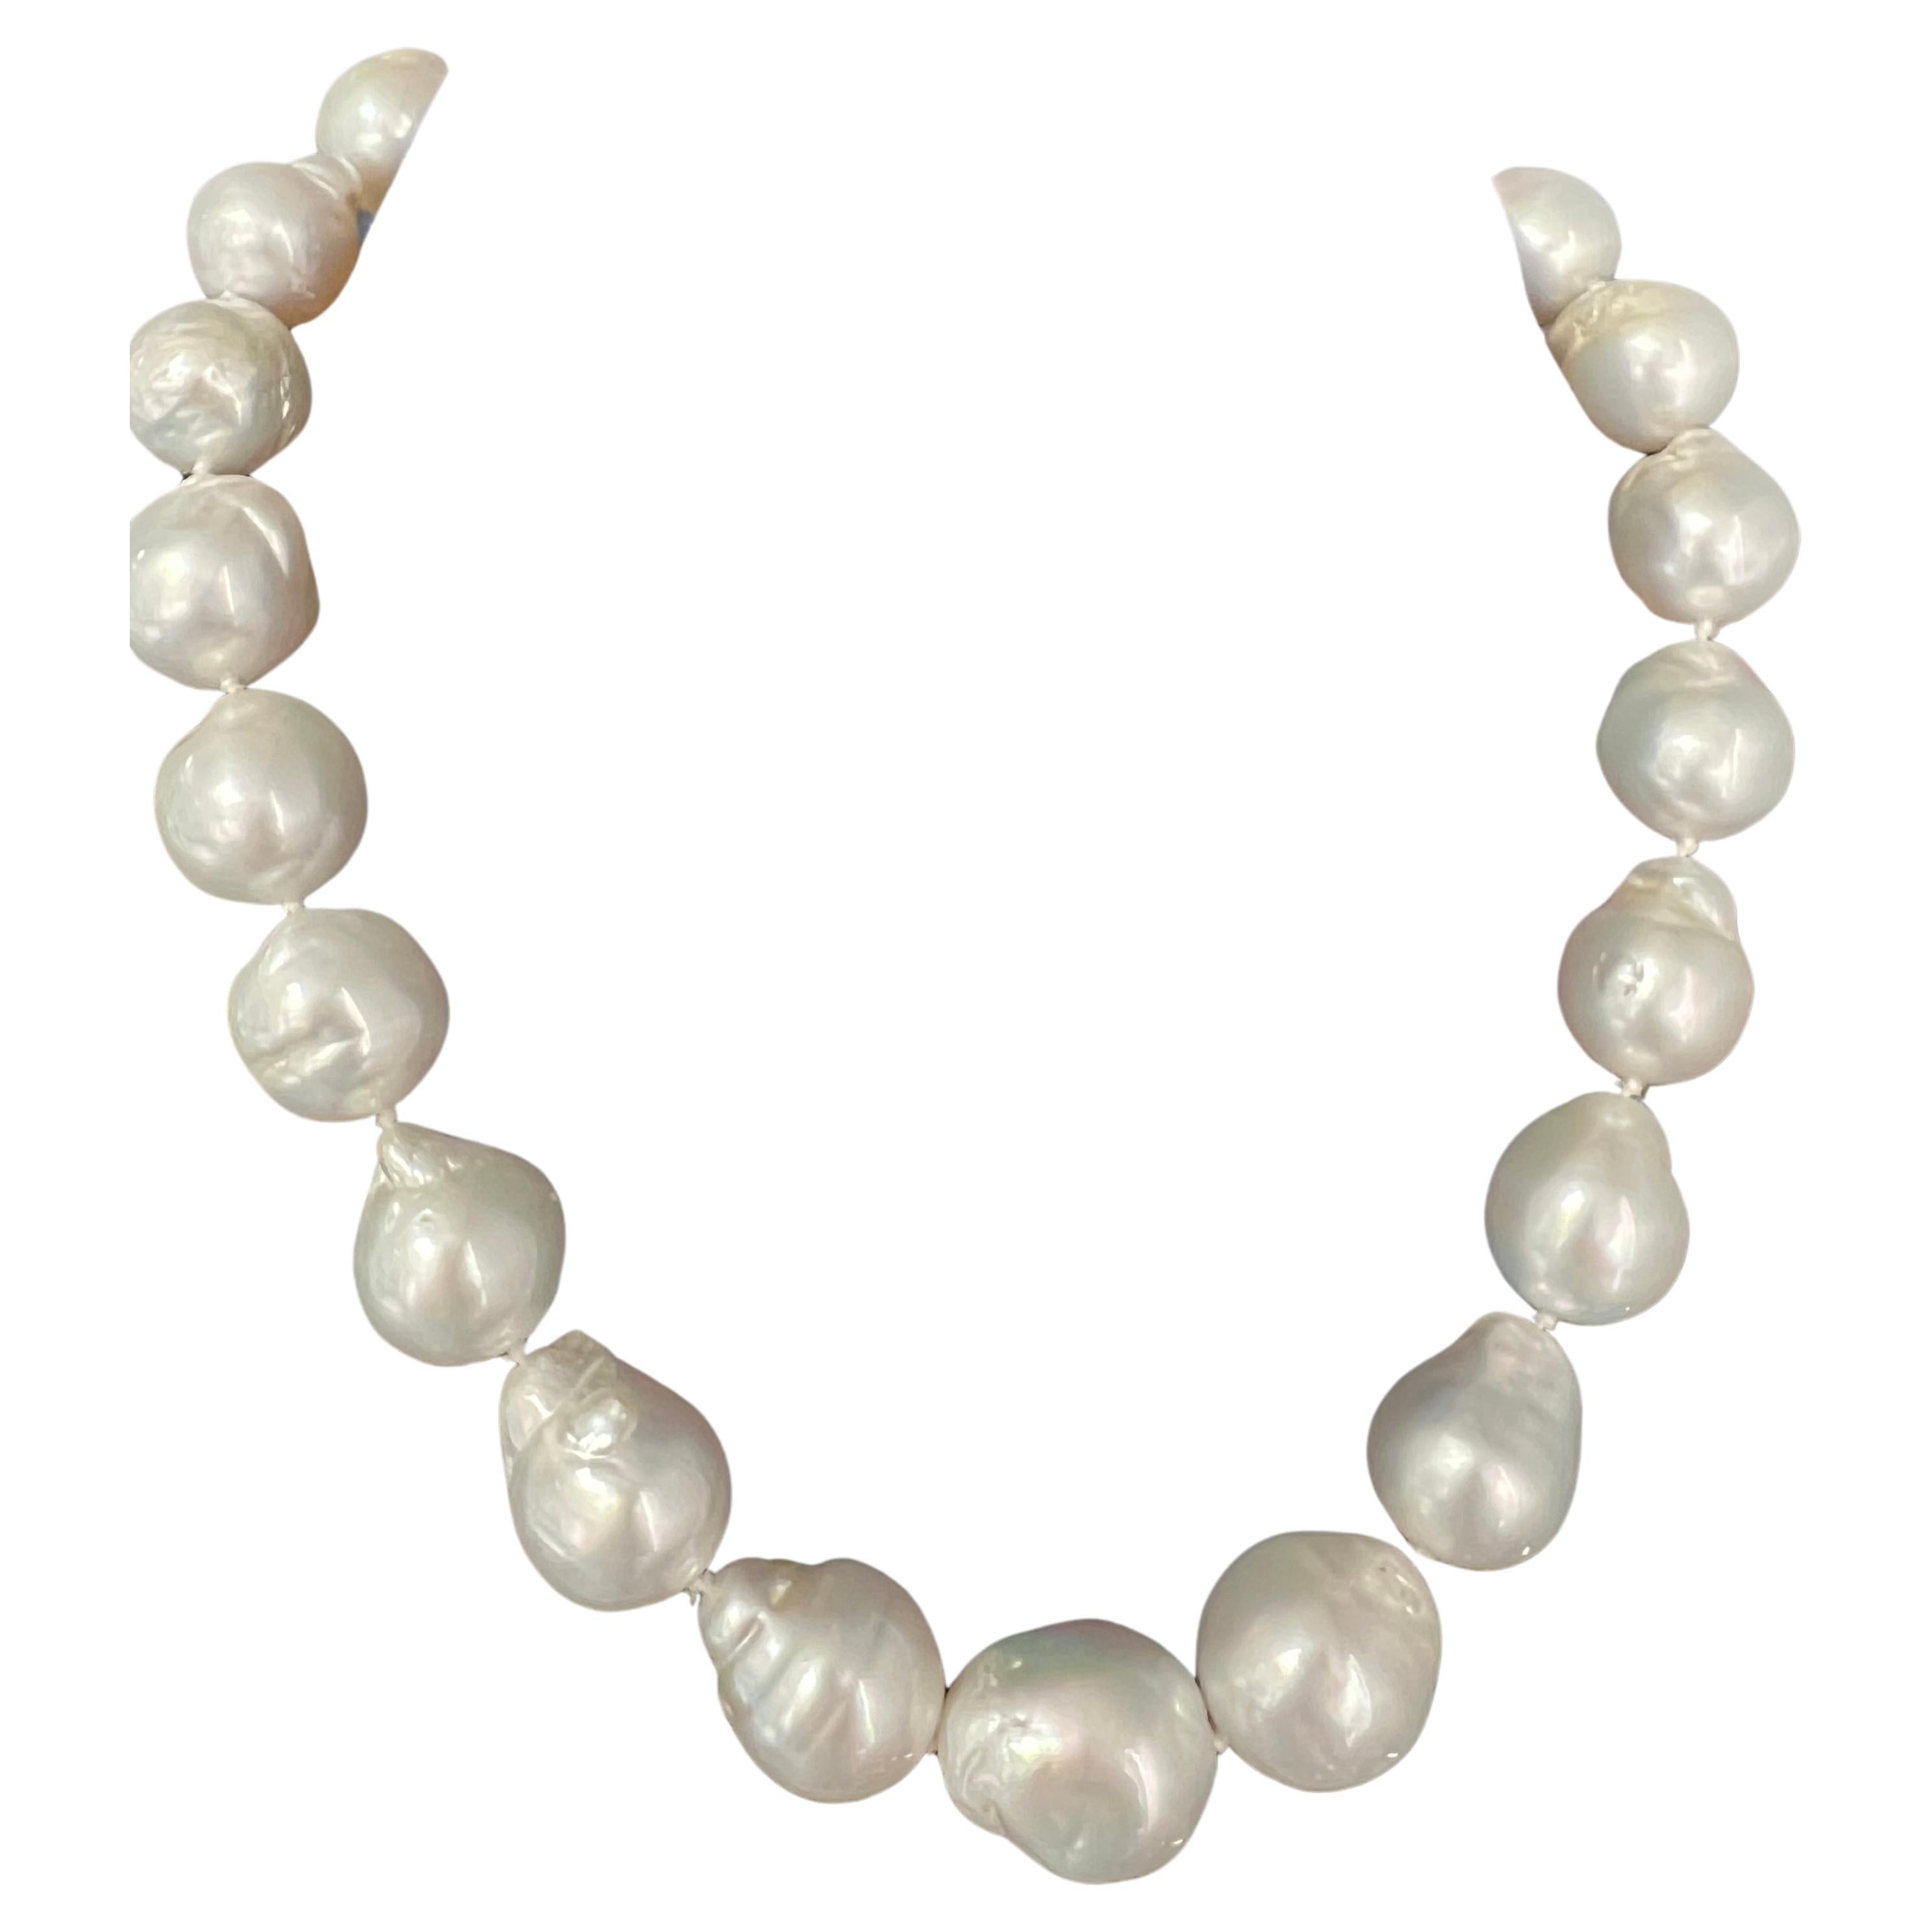 A magnificent Australian South Sea Cultured Baroque Pearl Necklace set in a graduating strand of 23 pearls measuring approximately 14mm to 17.5mm. The pearls have excellent luster and are white. 

The strand includes an 18k yellow gold matte finish